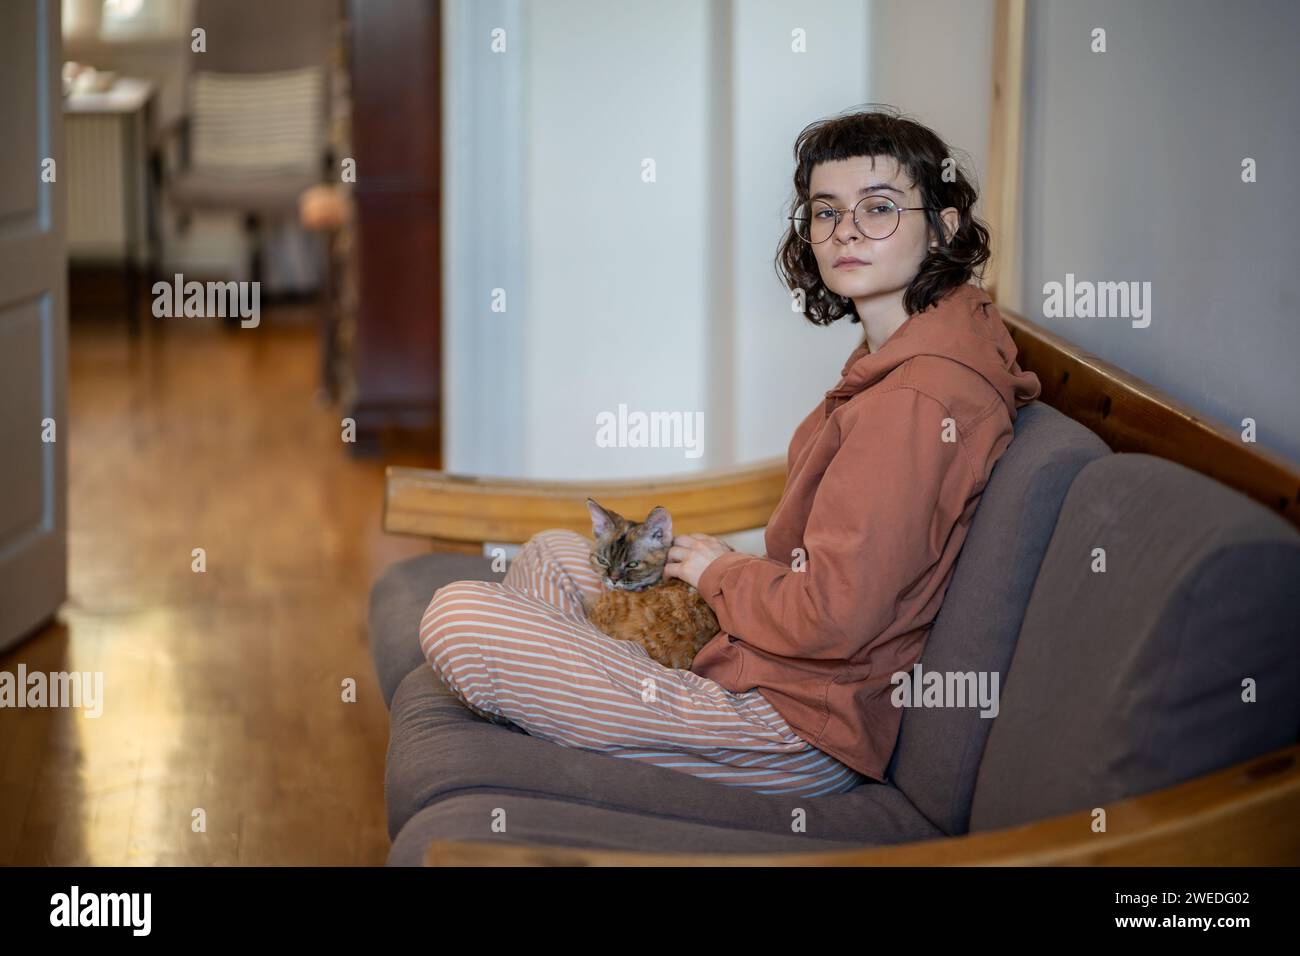 Brooding teenager, pet owner sitting on couch, thinking, stroking sleepy breed cat lying on knees Stock Photo